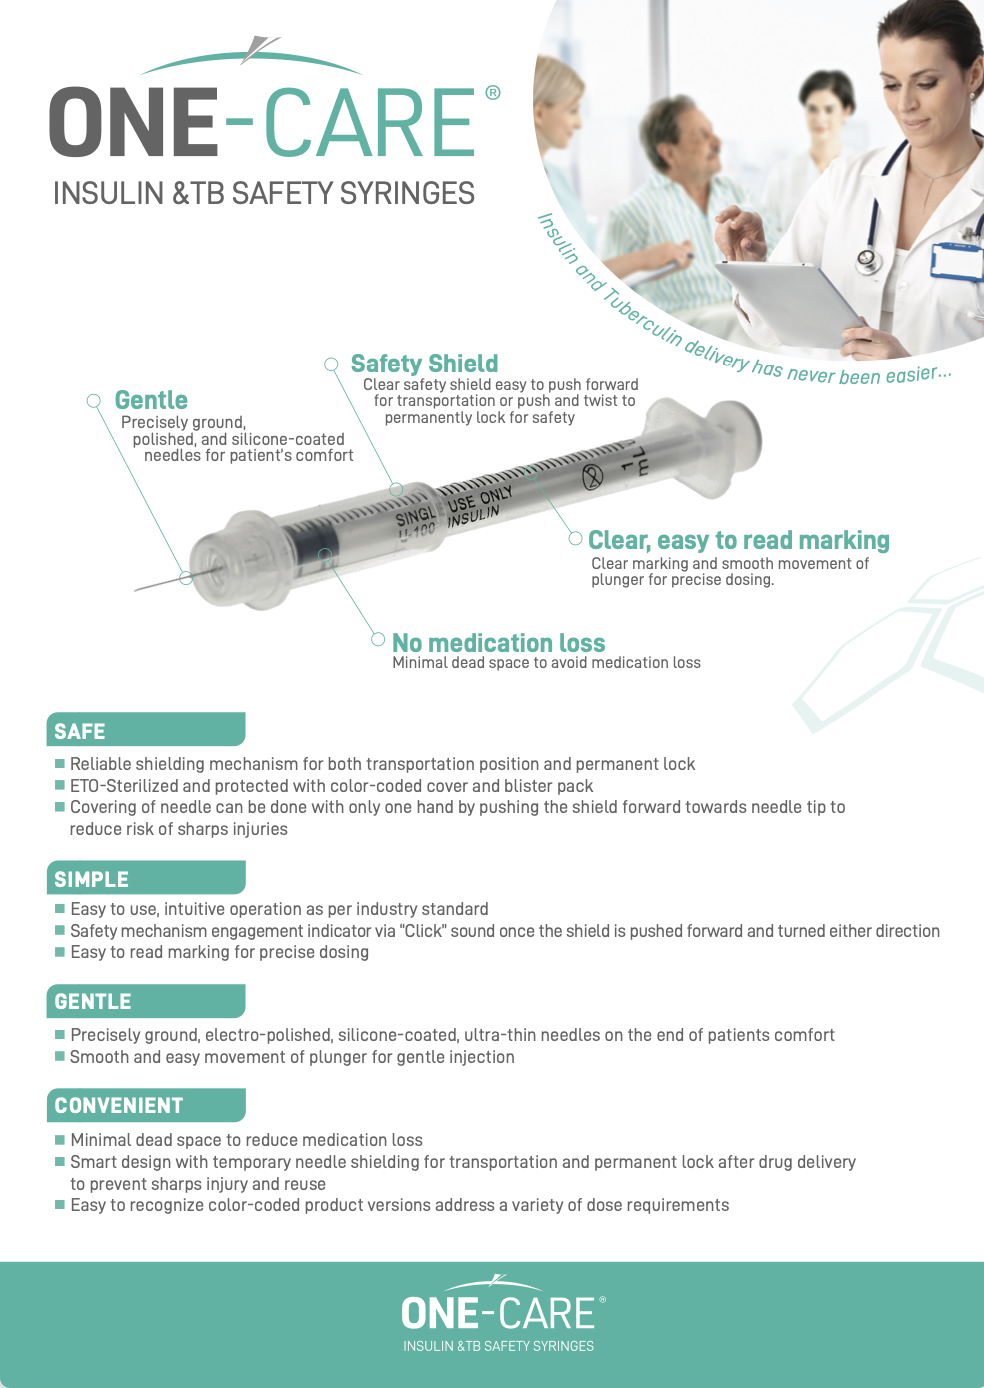 One-Care Insulin and TB Safety Syringes